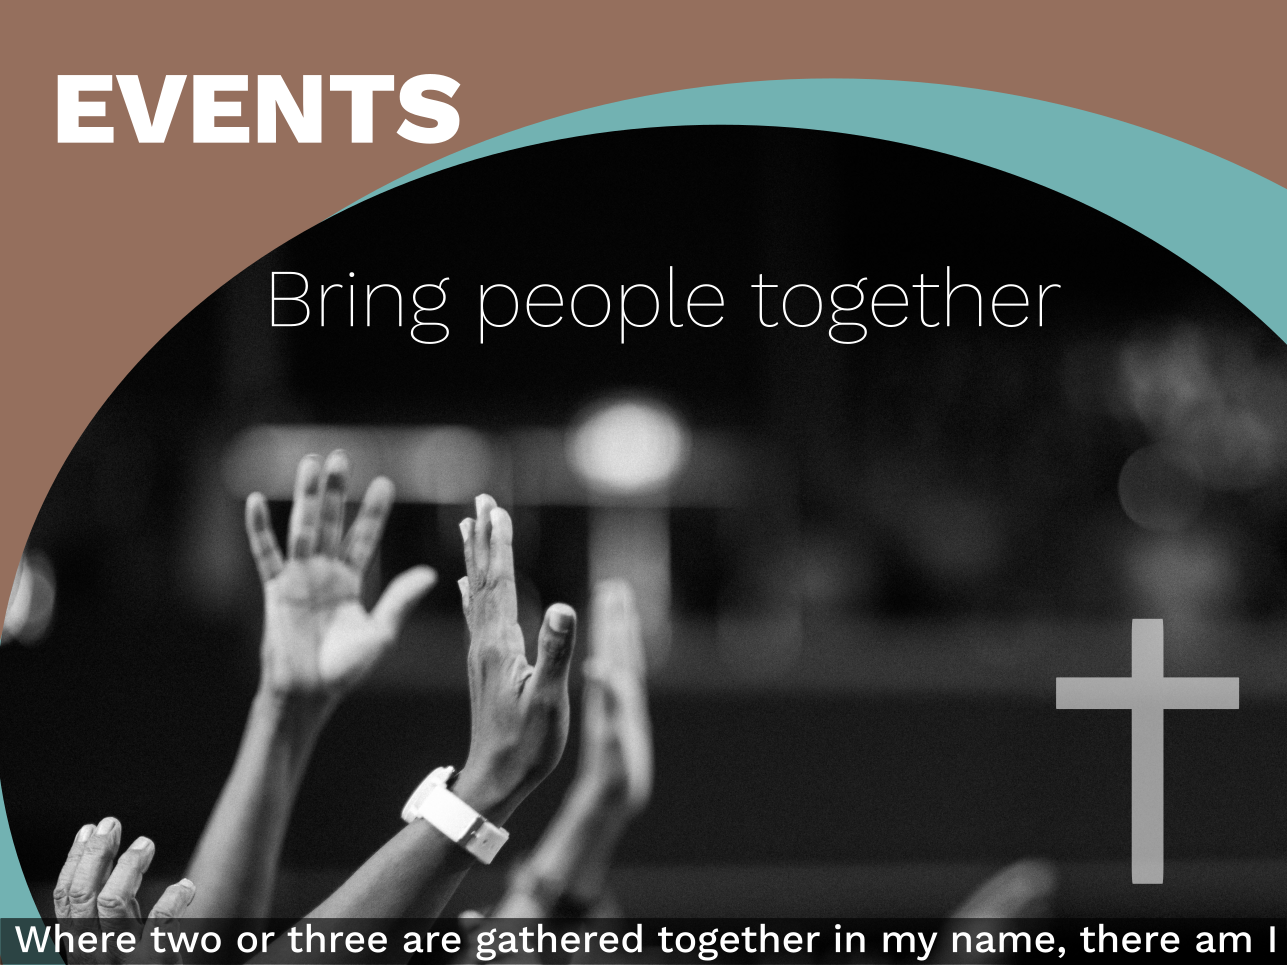 Create events at your church